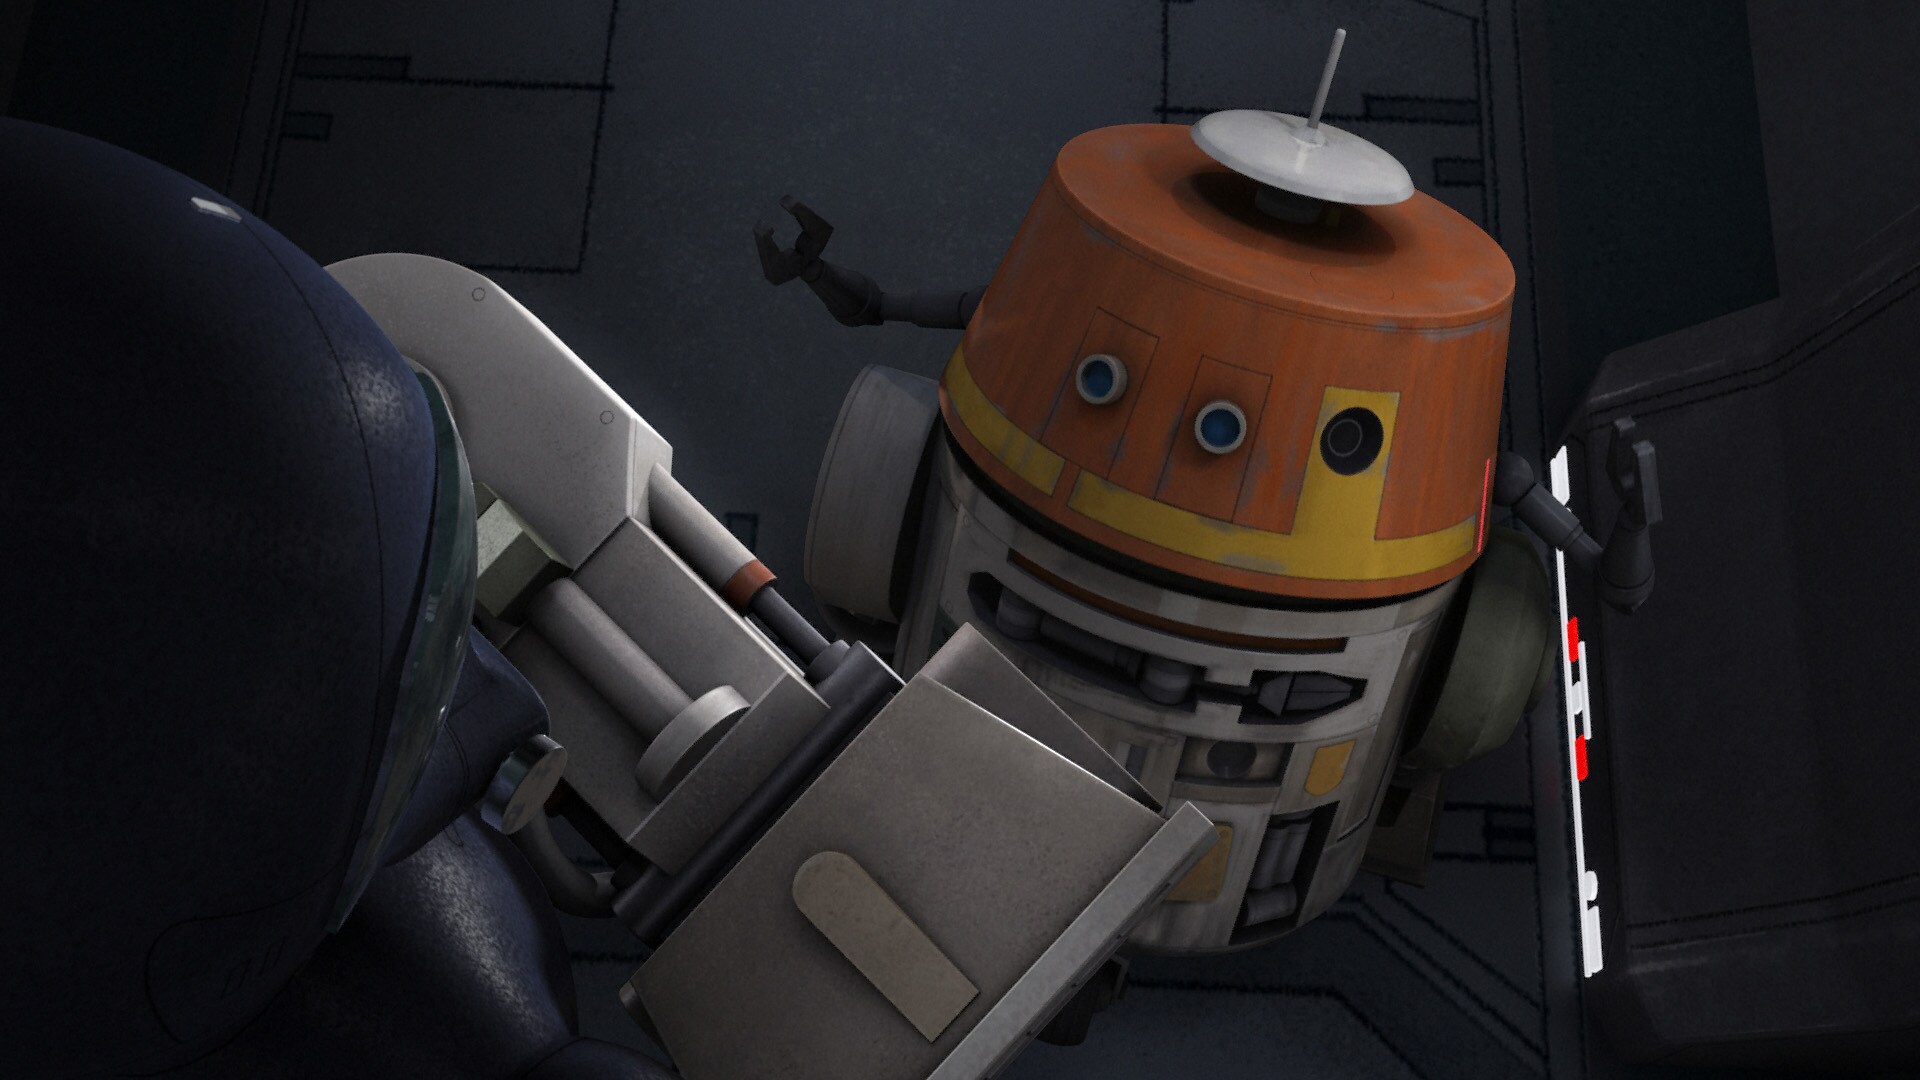 Chopper evades the droid for a time, but eventually comes upon a locked door and is caught. The i...